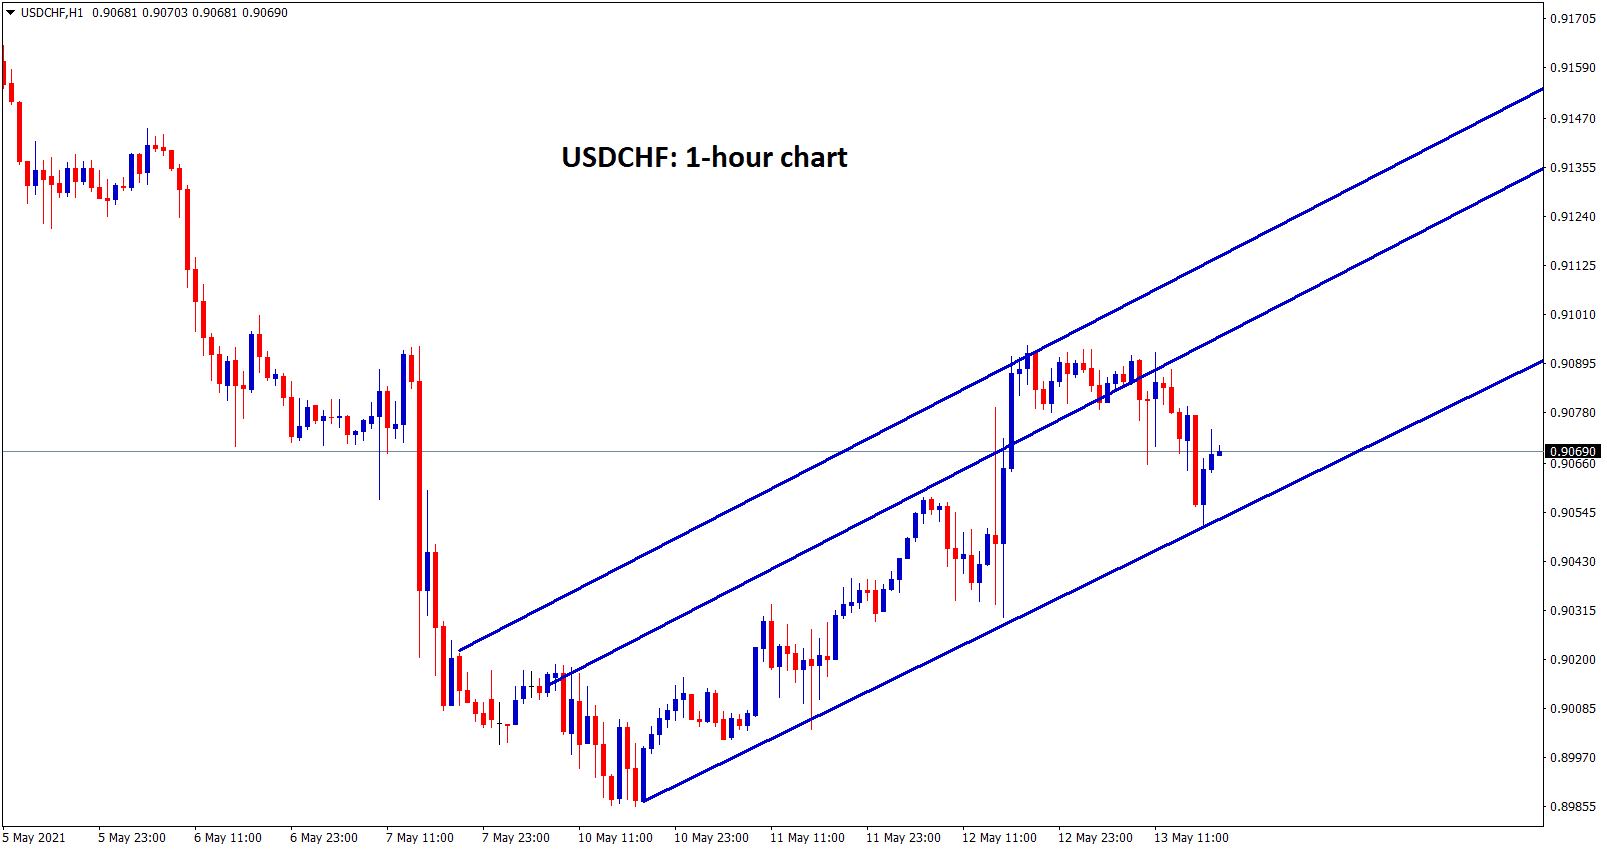 USDCHF moving in an uptrend in 30 min chart.